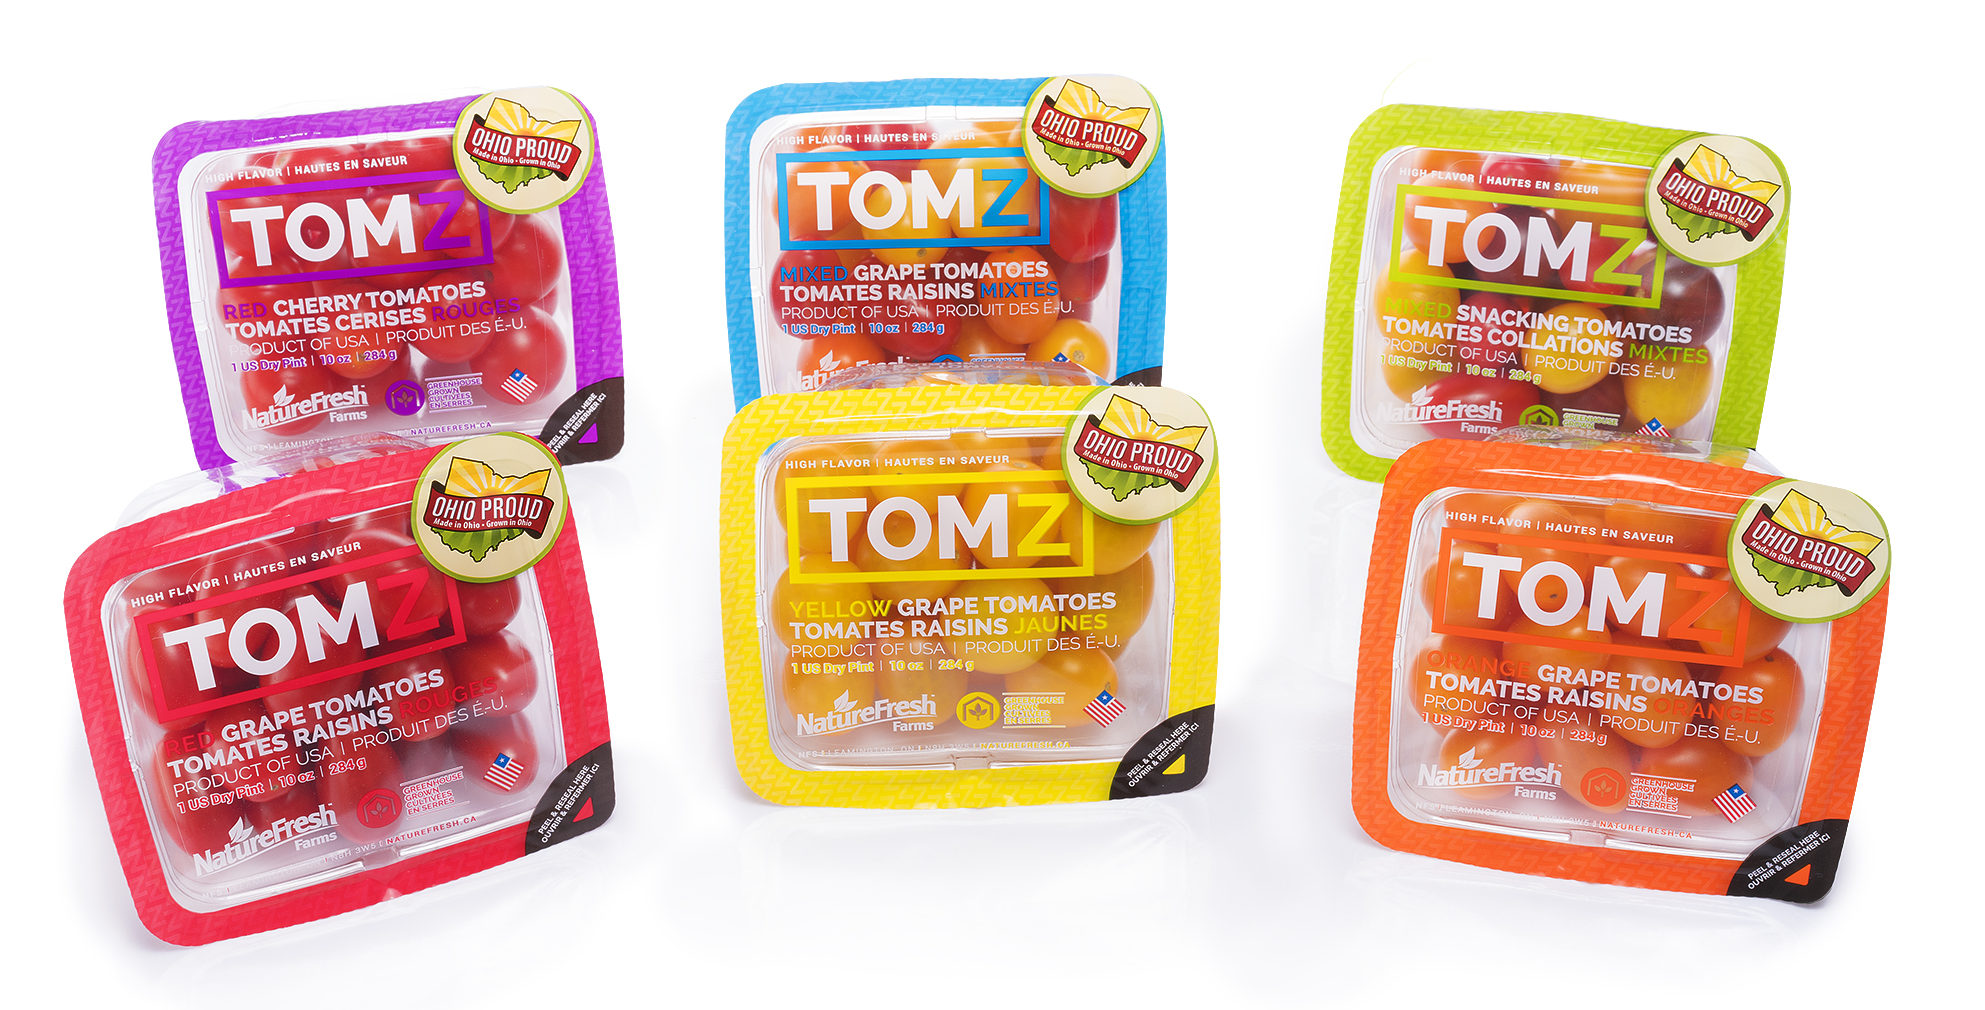 nff-tomz-snacking_tomatoes-dry_pint-topseal